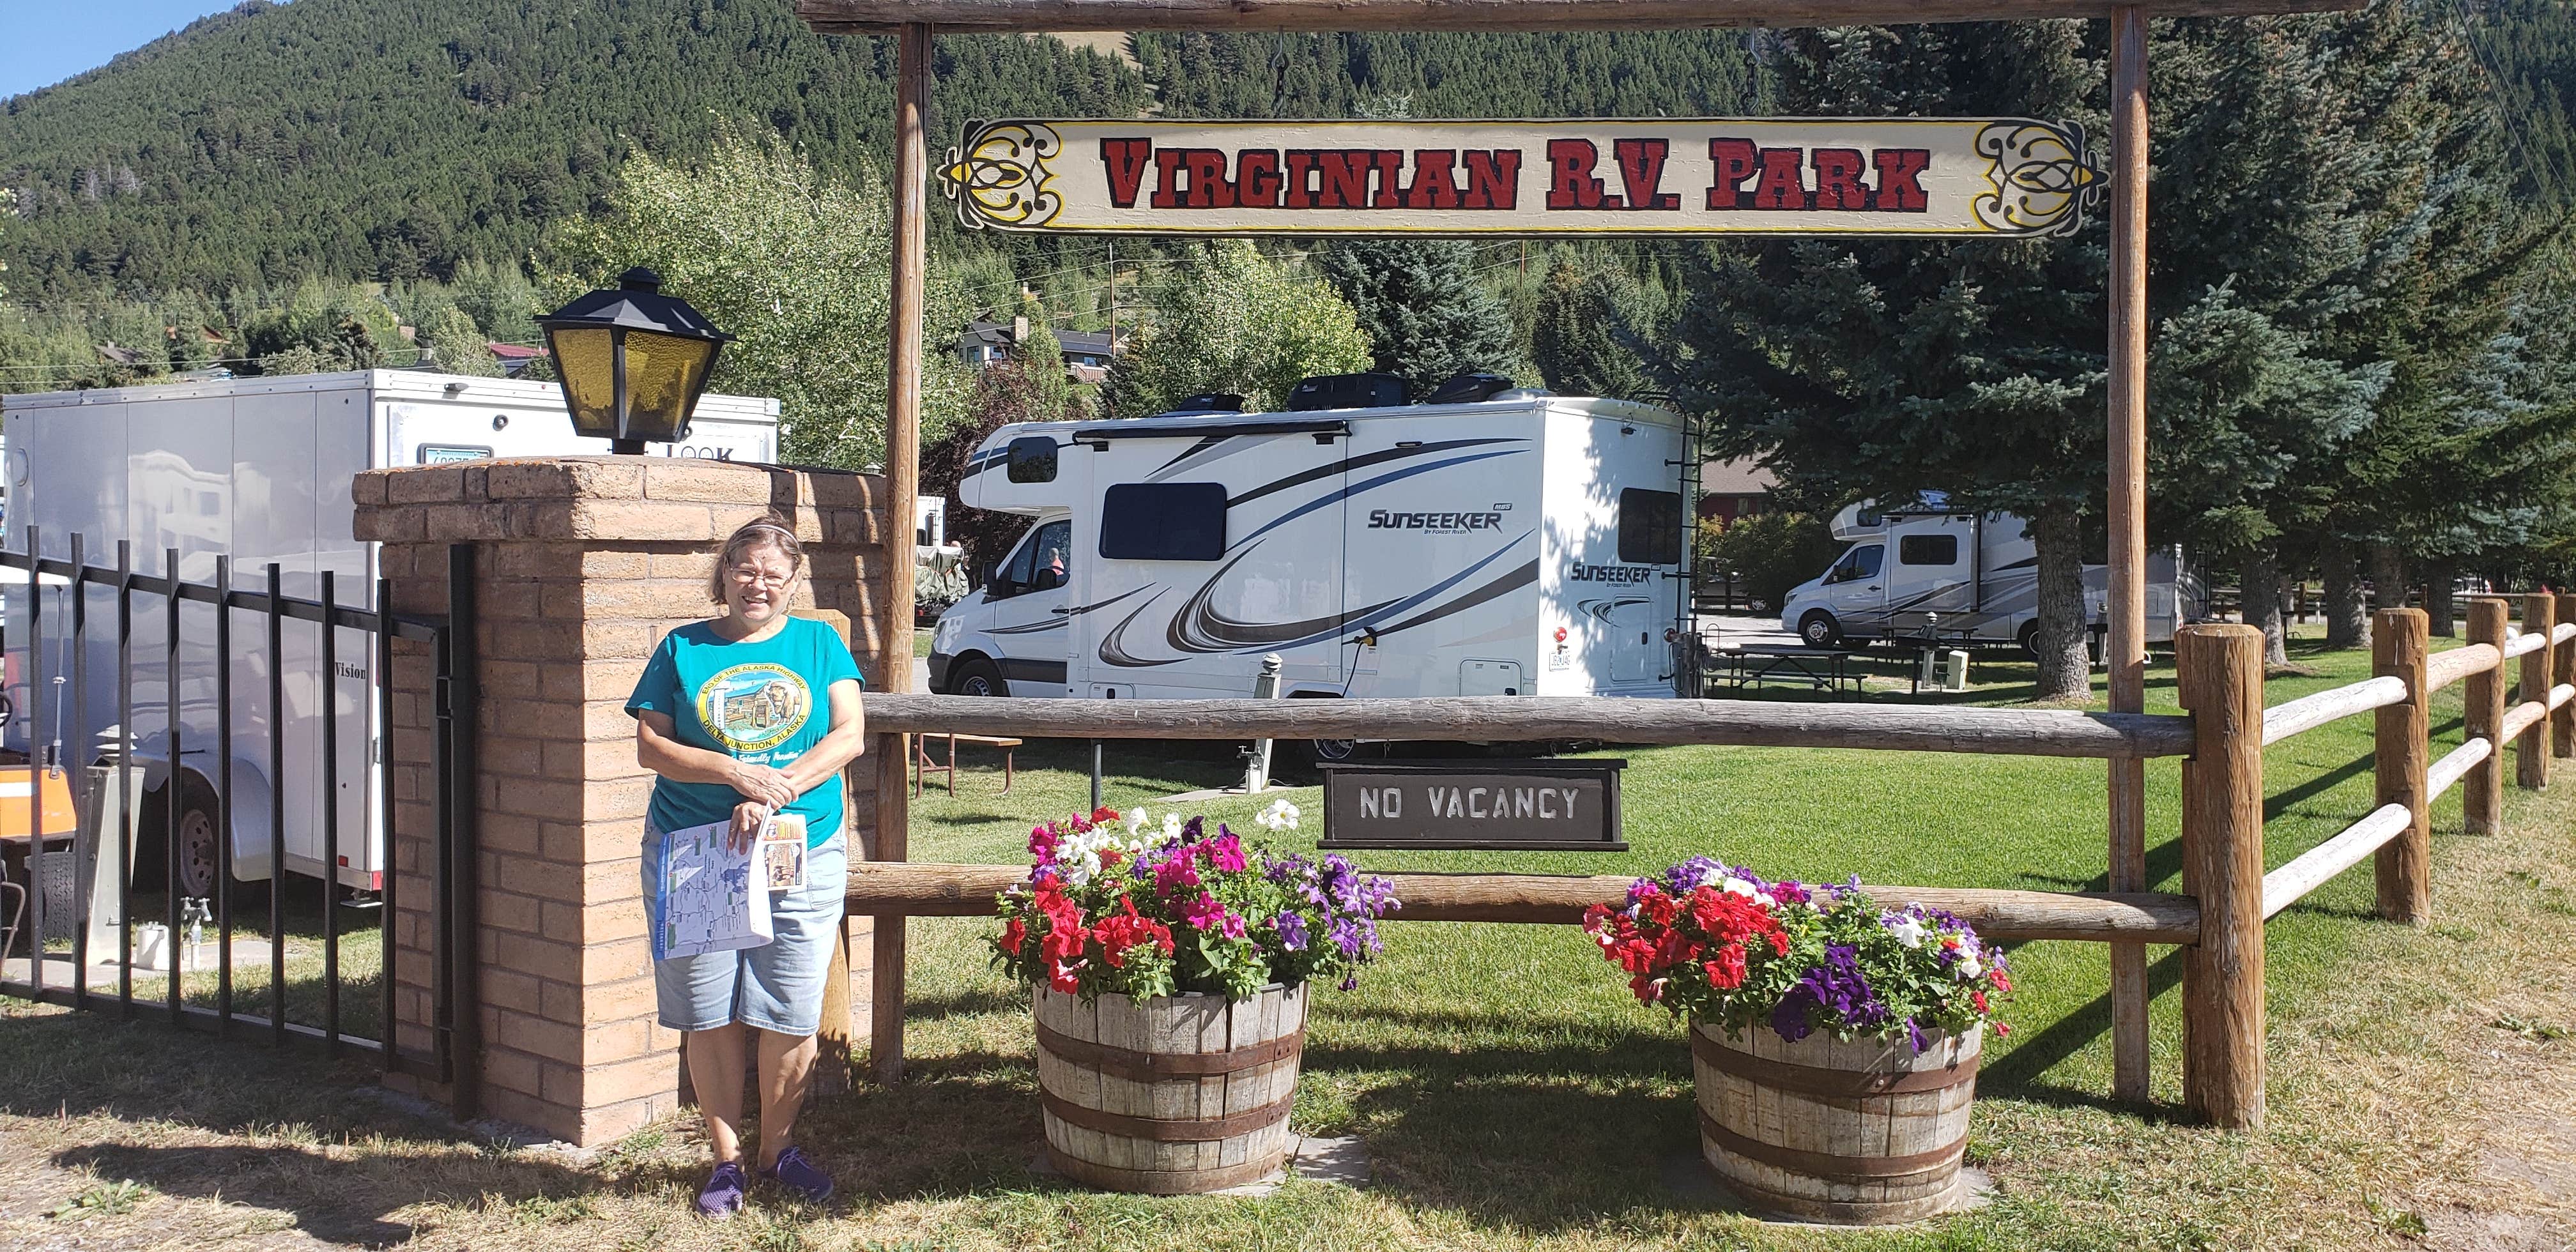 Camper submitted image from Virginian RV Park - 3